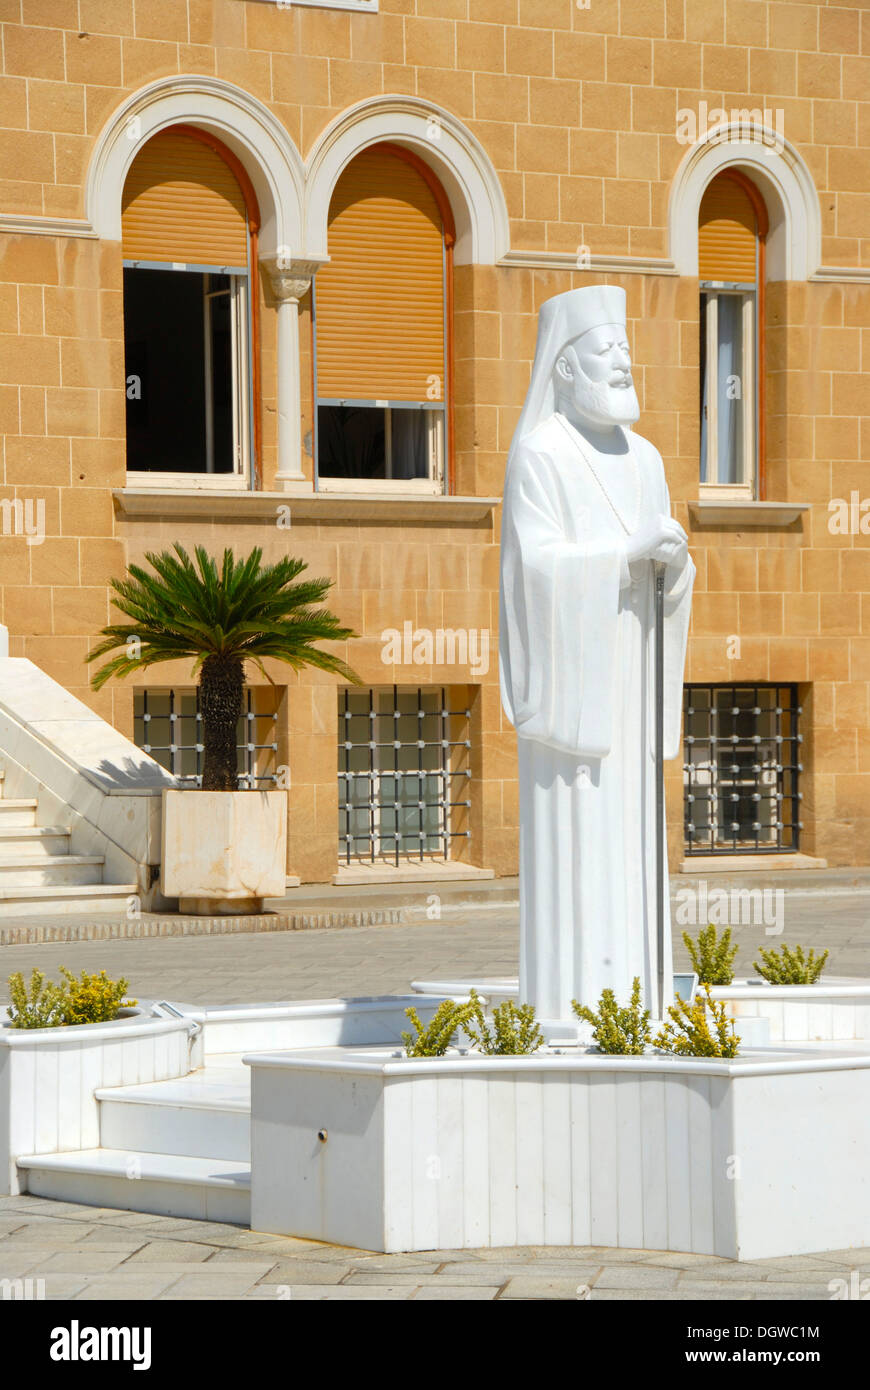 New statue, white marble, Archbishop and President Makarios III, Archbishop's Palace, Nicosia, Lefkosia, Southern Cyprus Stock Photo